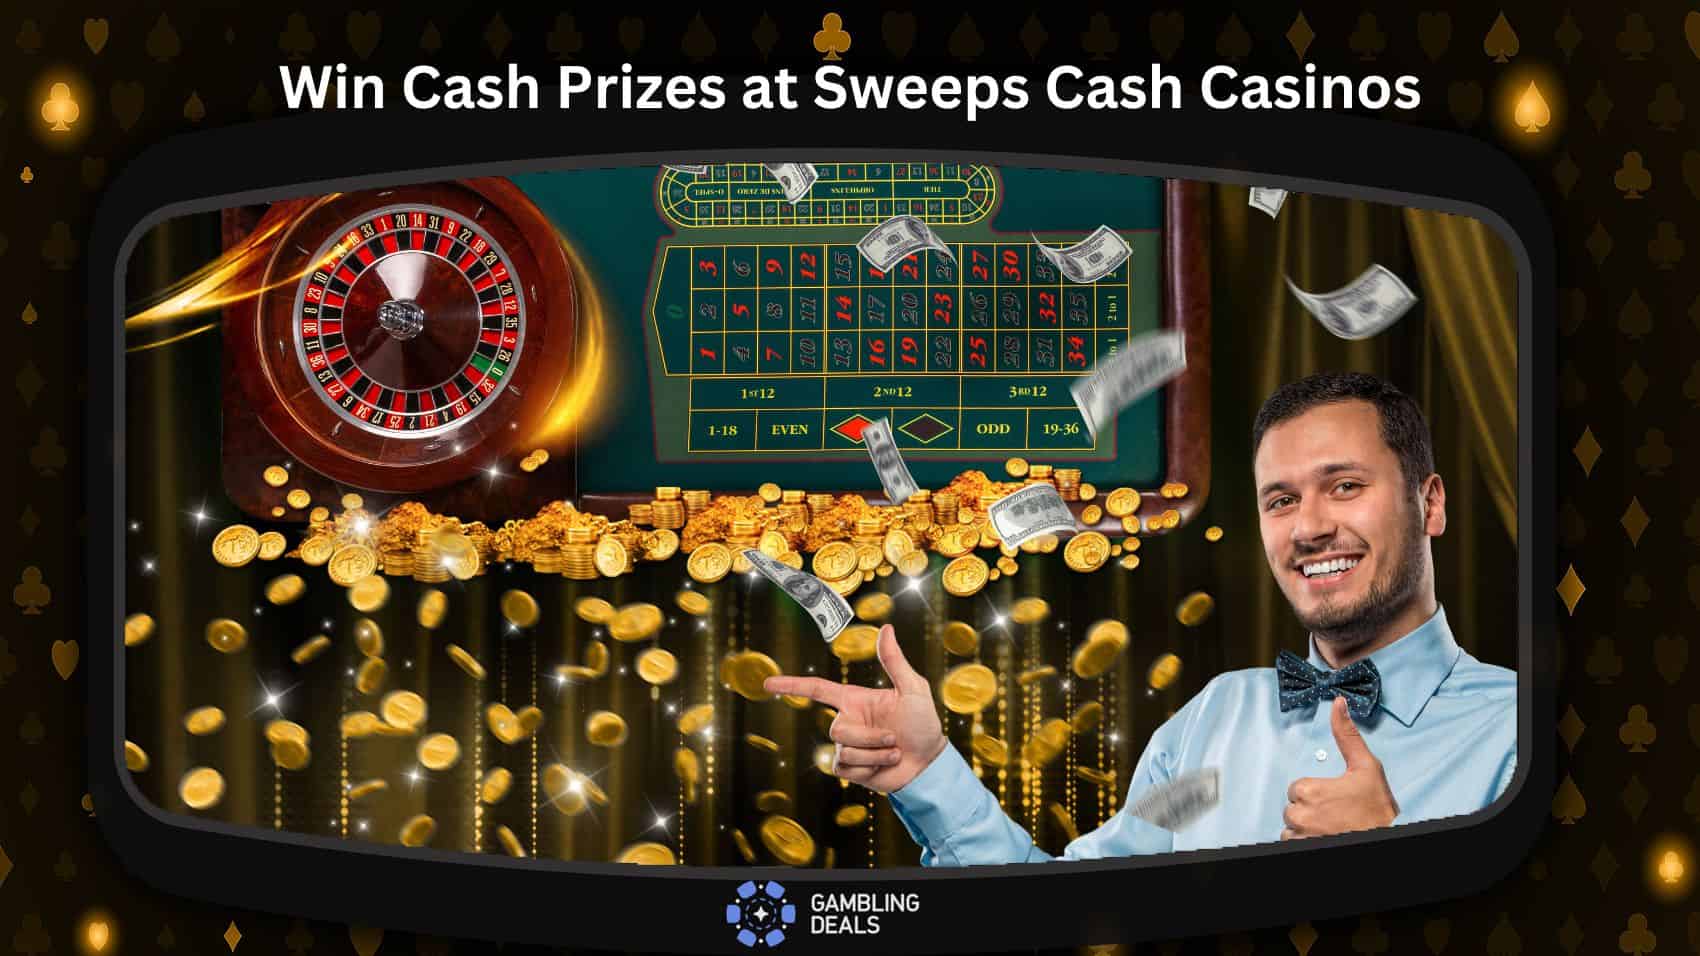 Win Cash Prizes at Sweeps Cash Casinos